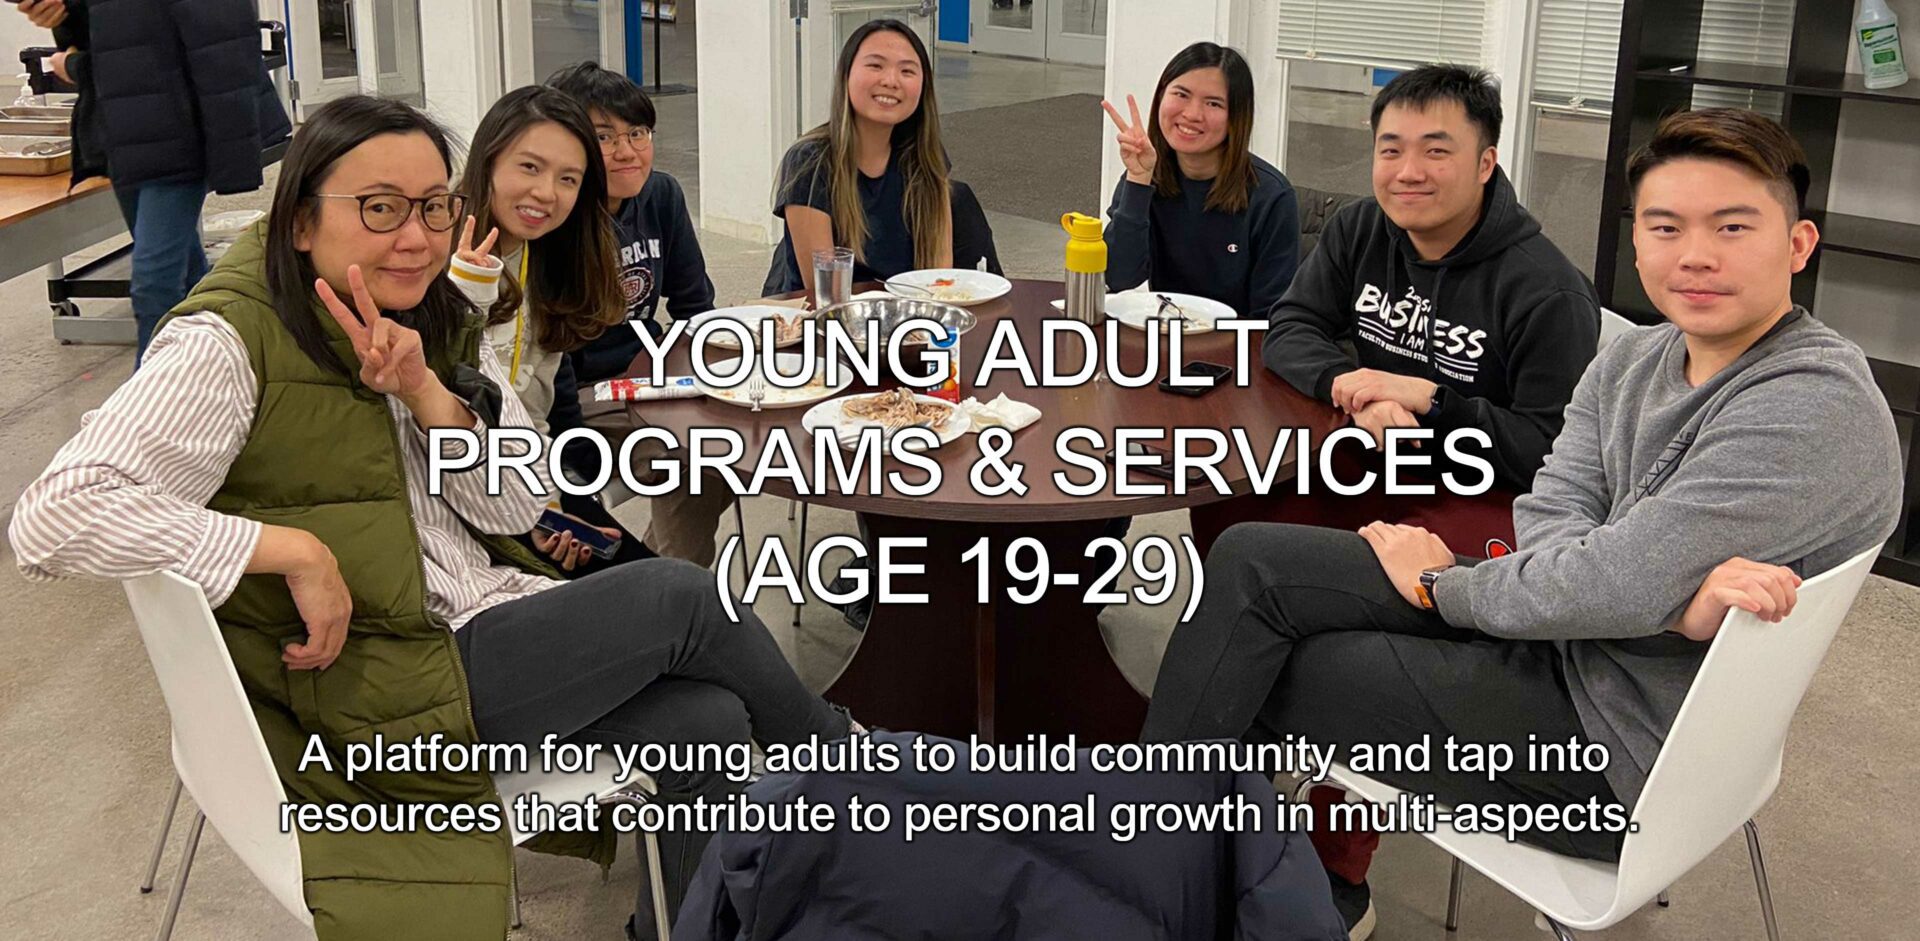 Young Adult Programs and Services (Age-19-29): A platform for young adults to build community and tap into resources that contribute to personal growth in multi-aspects.